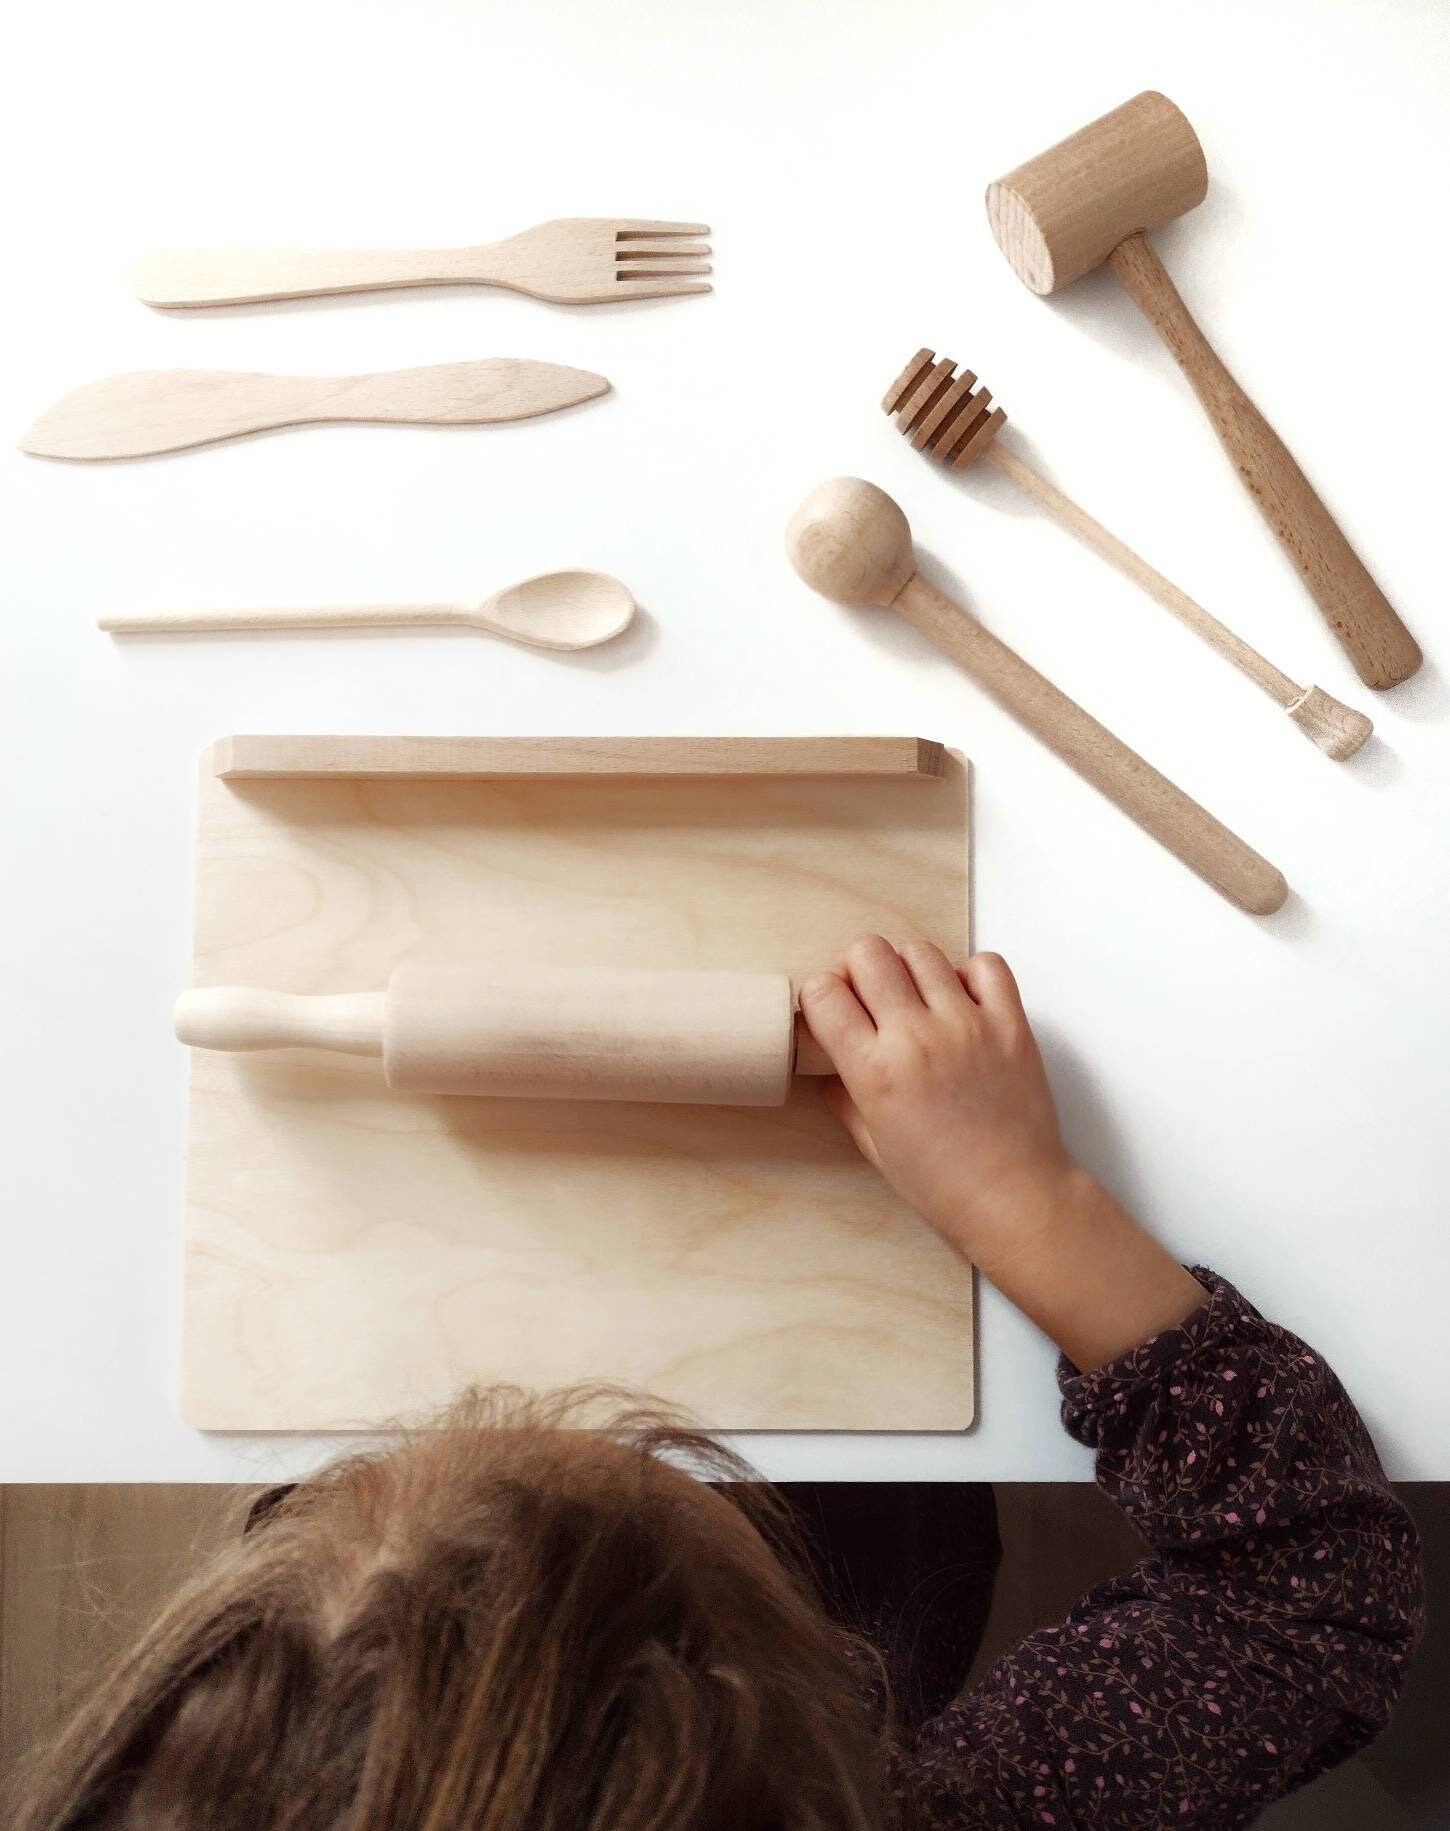 Kids Baking Set for Toy Kitchen, Set of 8 Wooden Utensils, Toddler Cooking  Play Kit, Birthday Gift for Little Chef, Montessori Education 